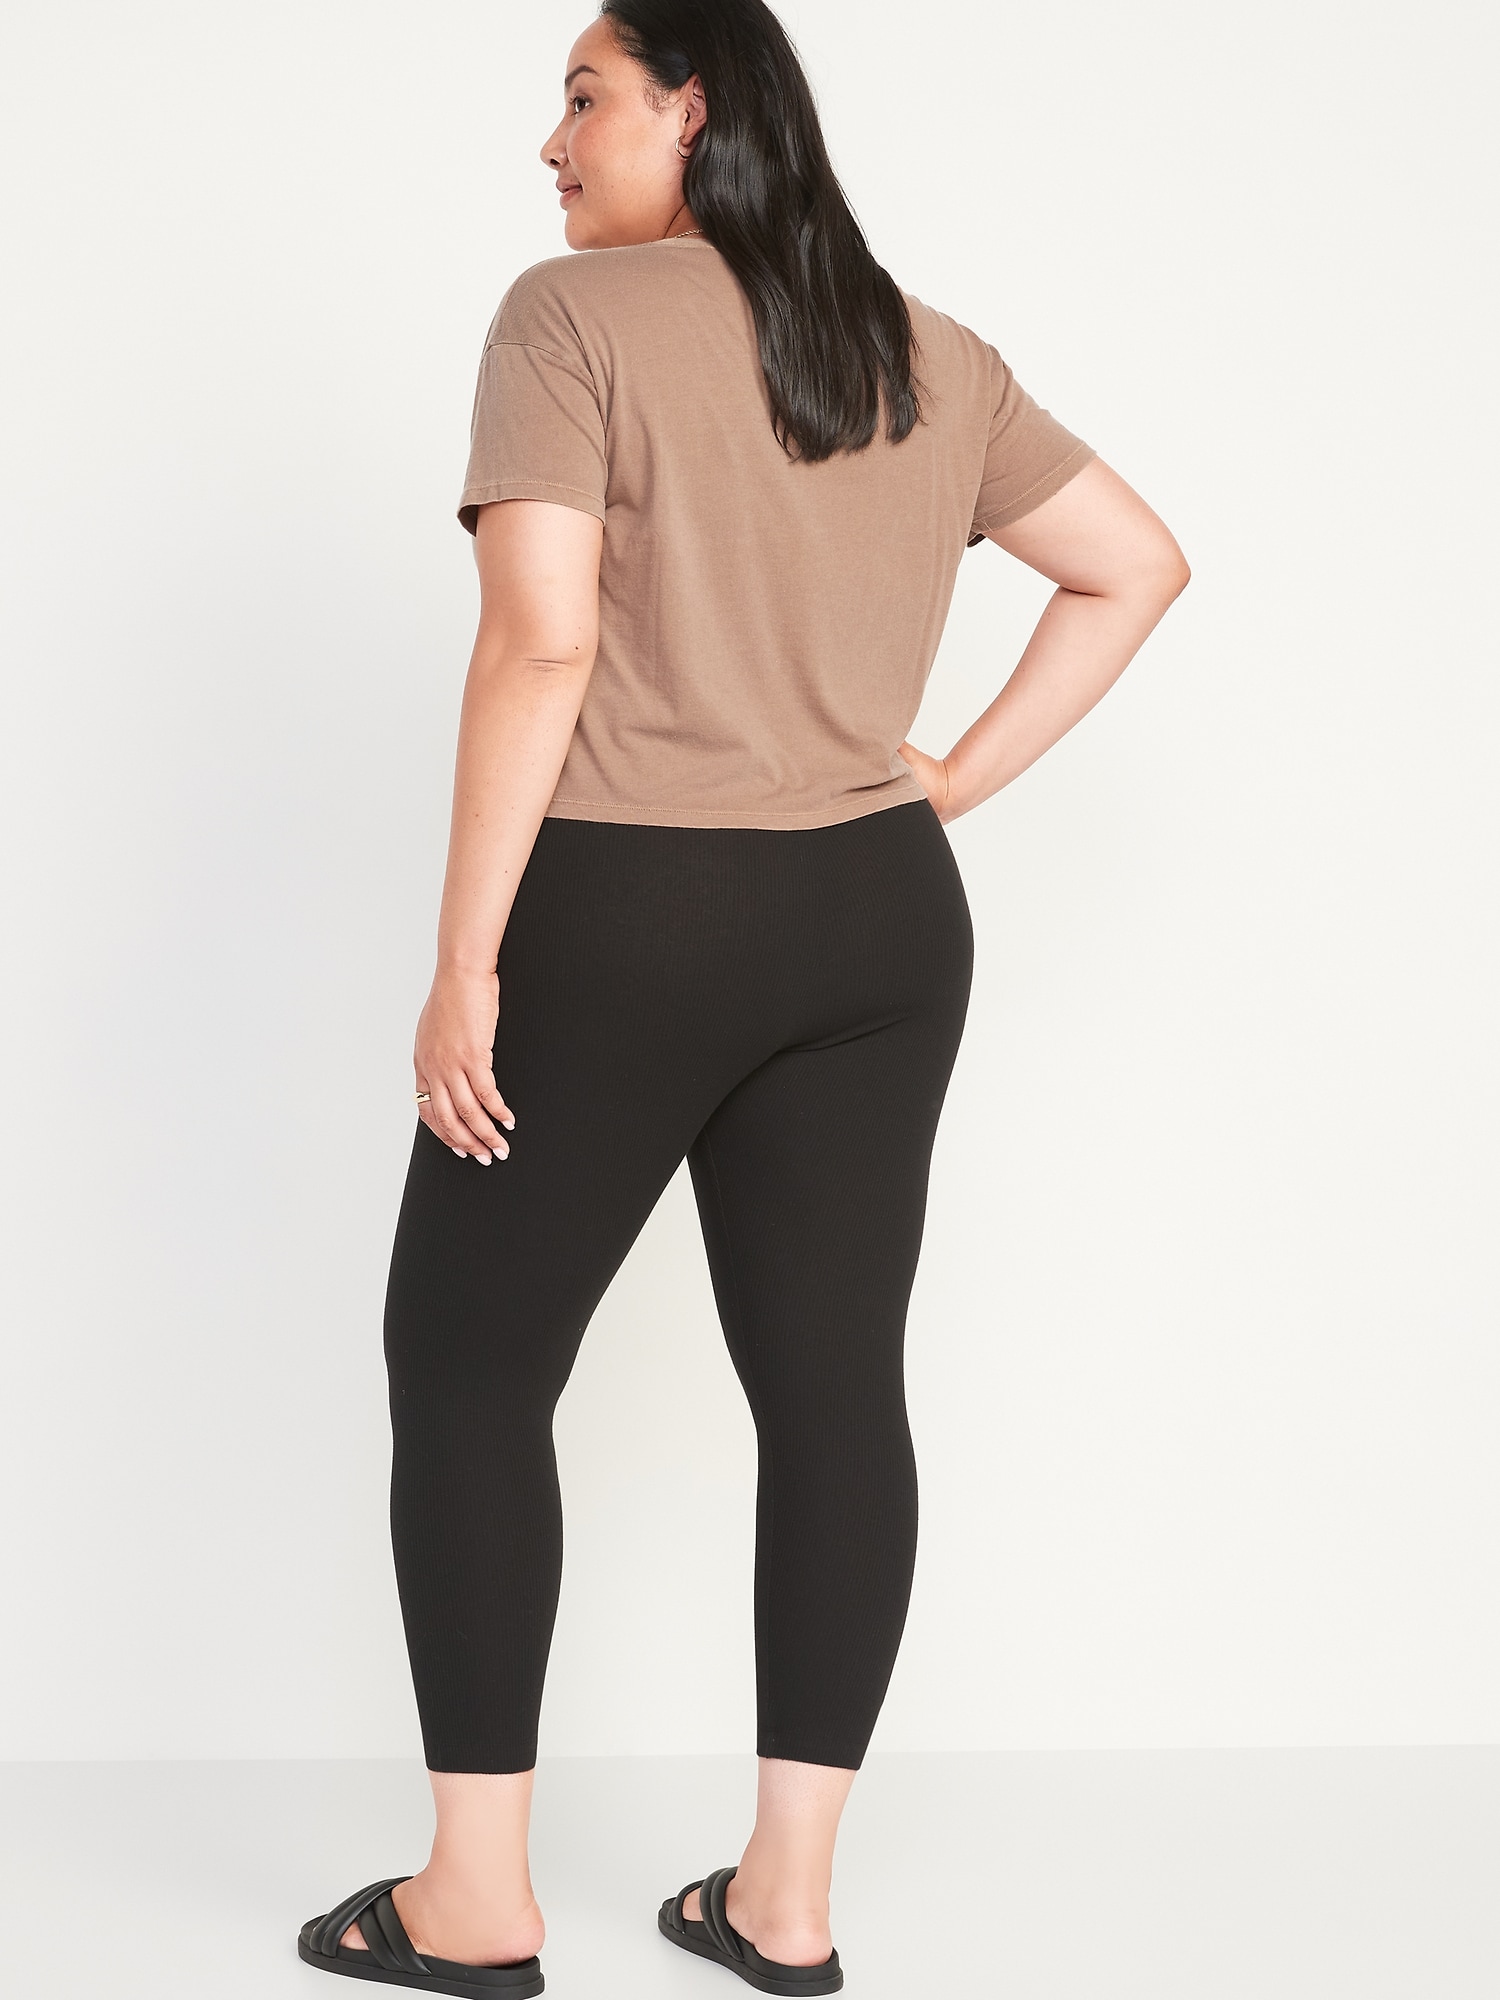 Extra High-Waisted Crossover Rib-Knit 7/8-Length Leggings for